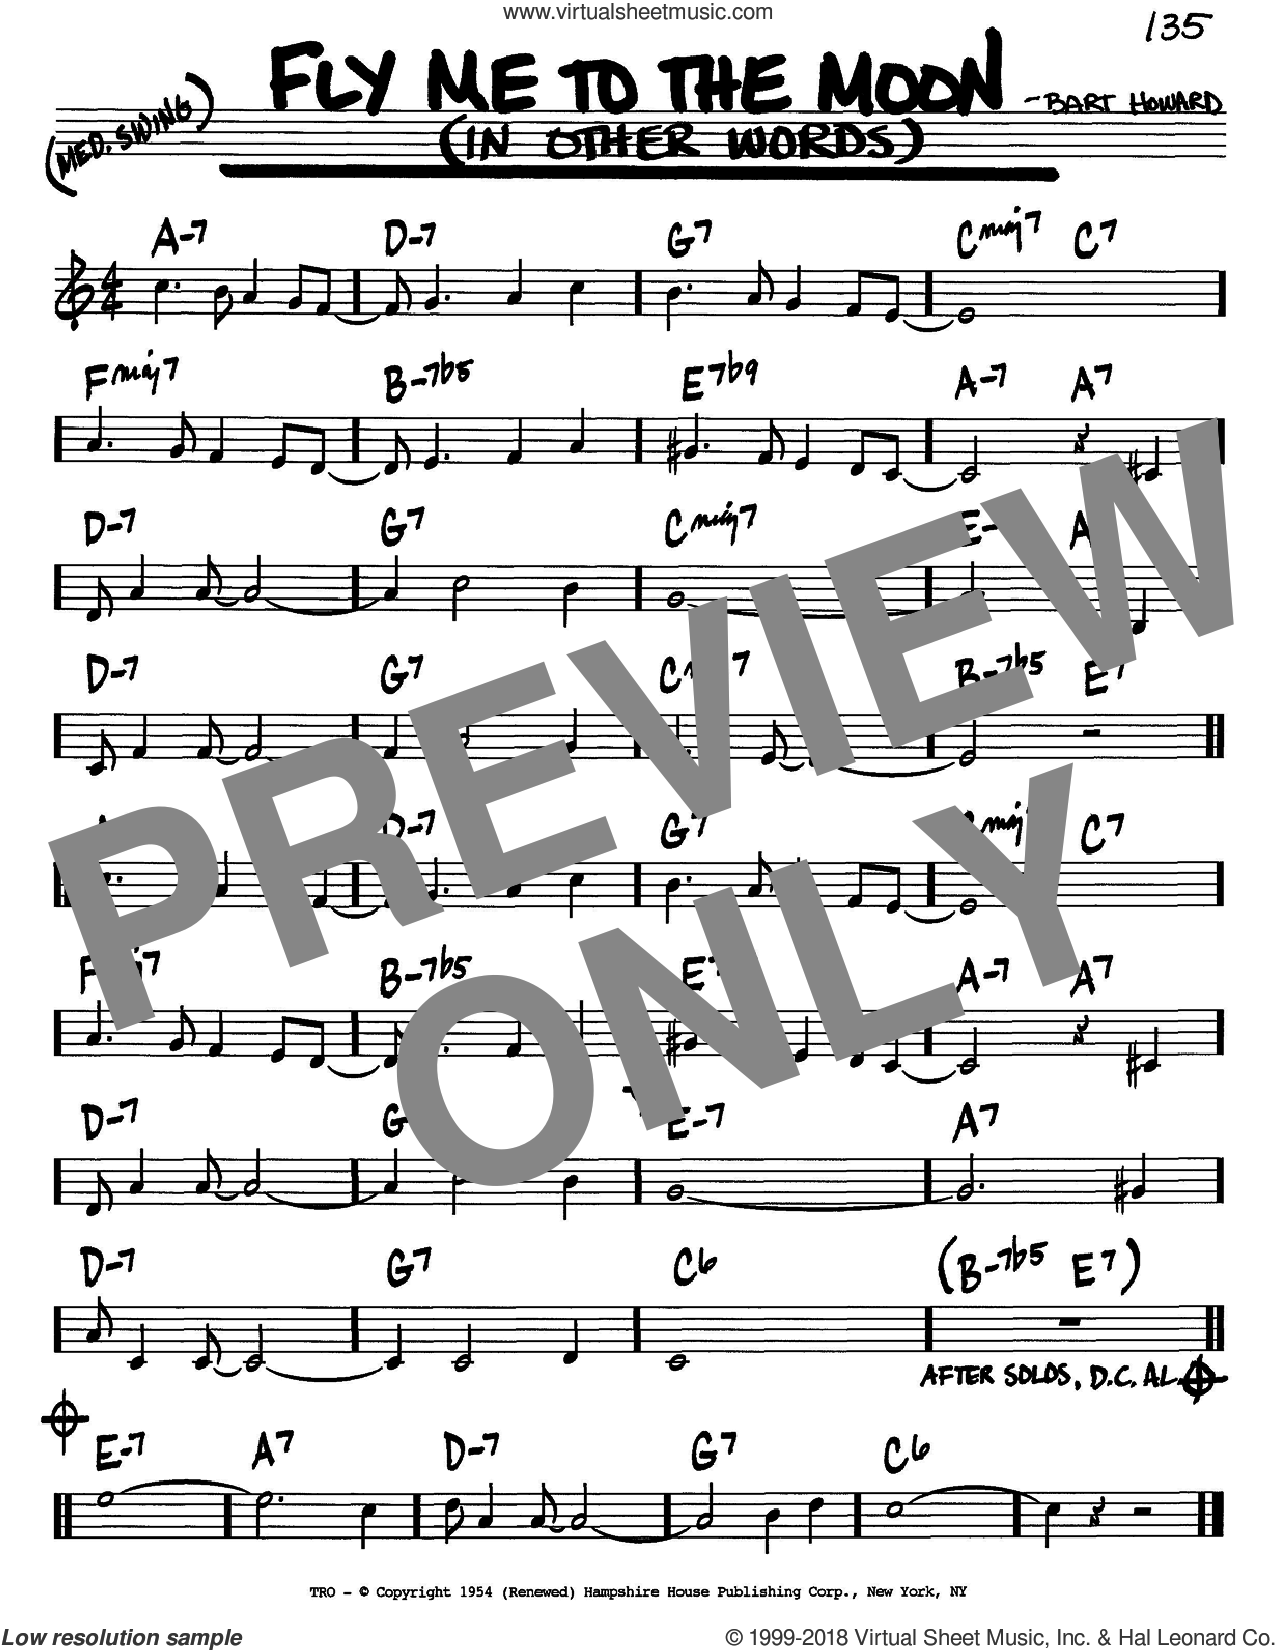 Fly me to the moon sheet music download free in PDF or MIDI